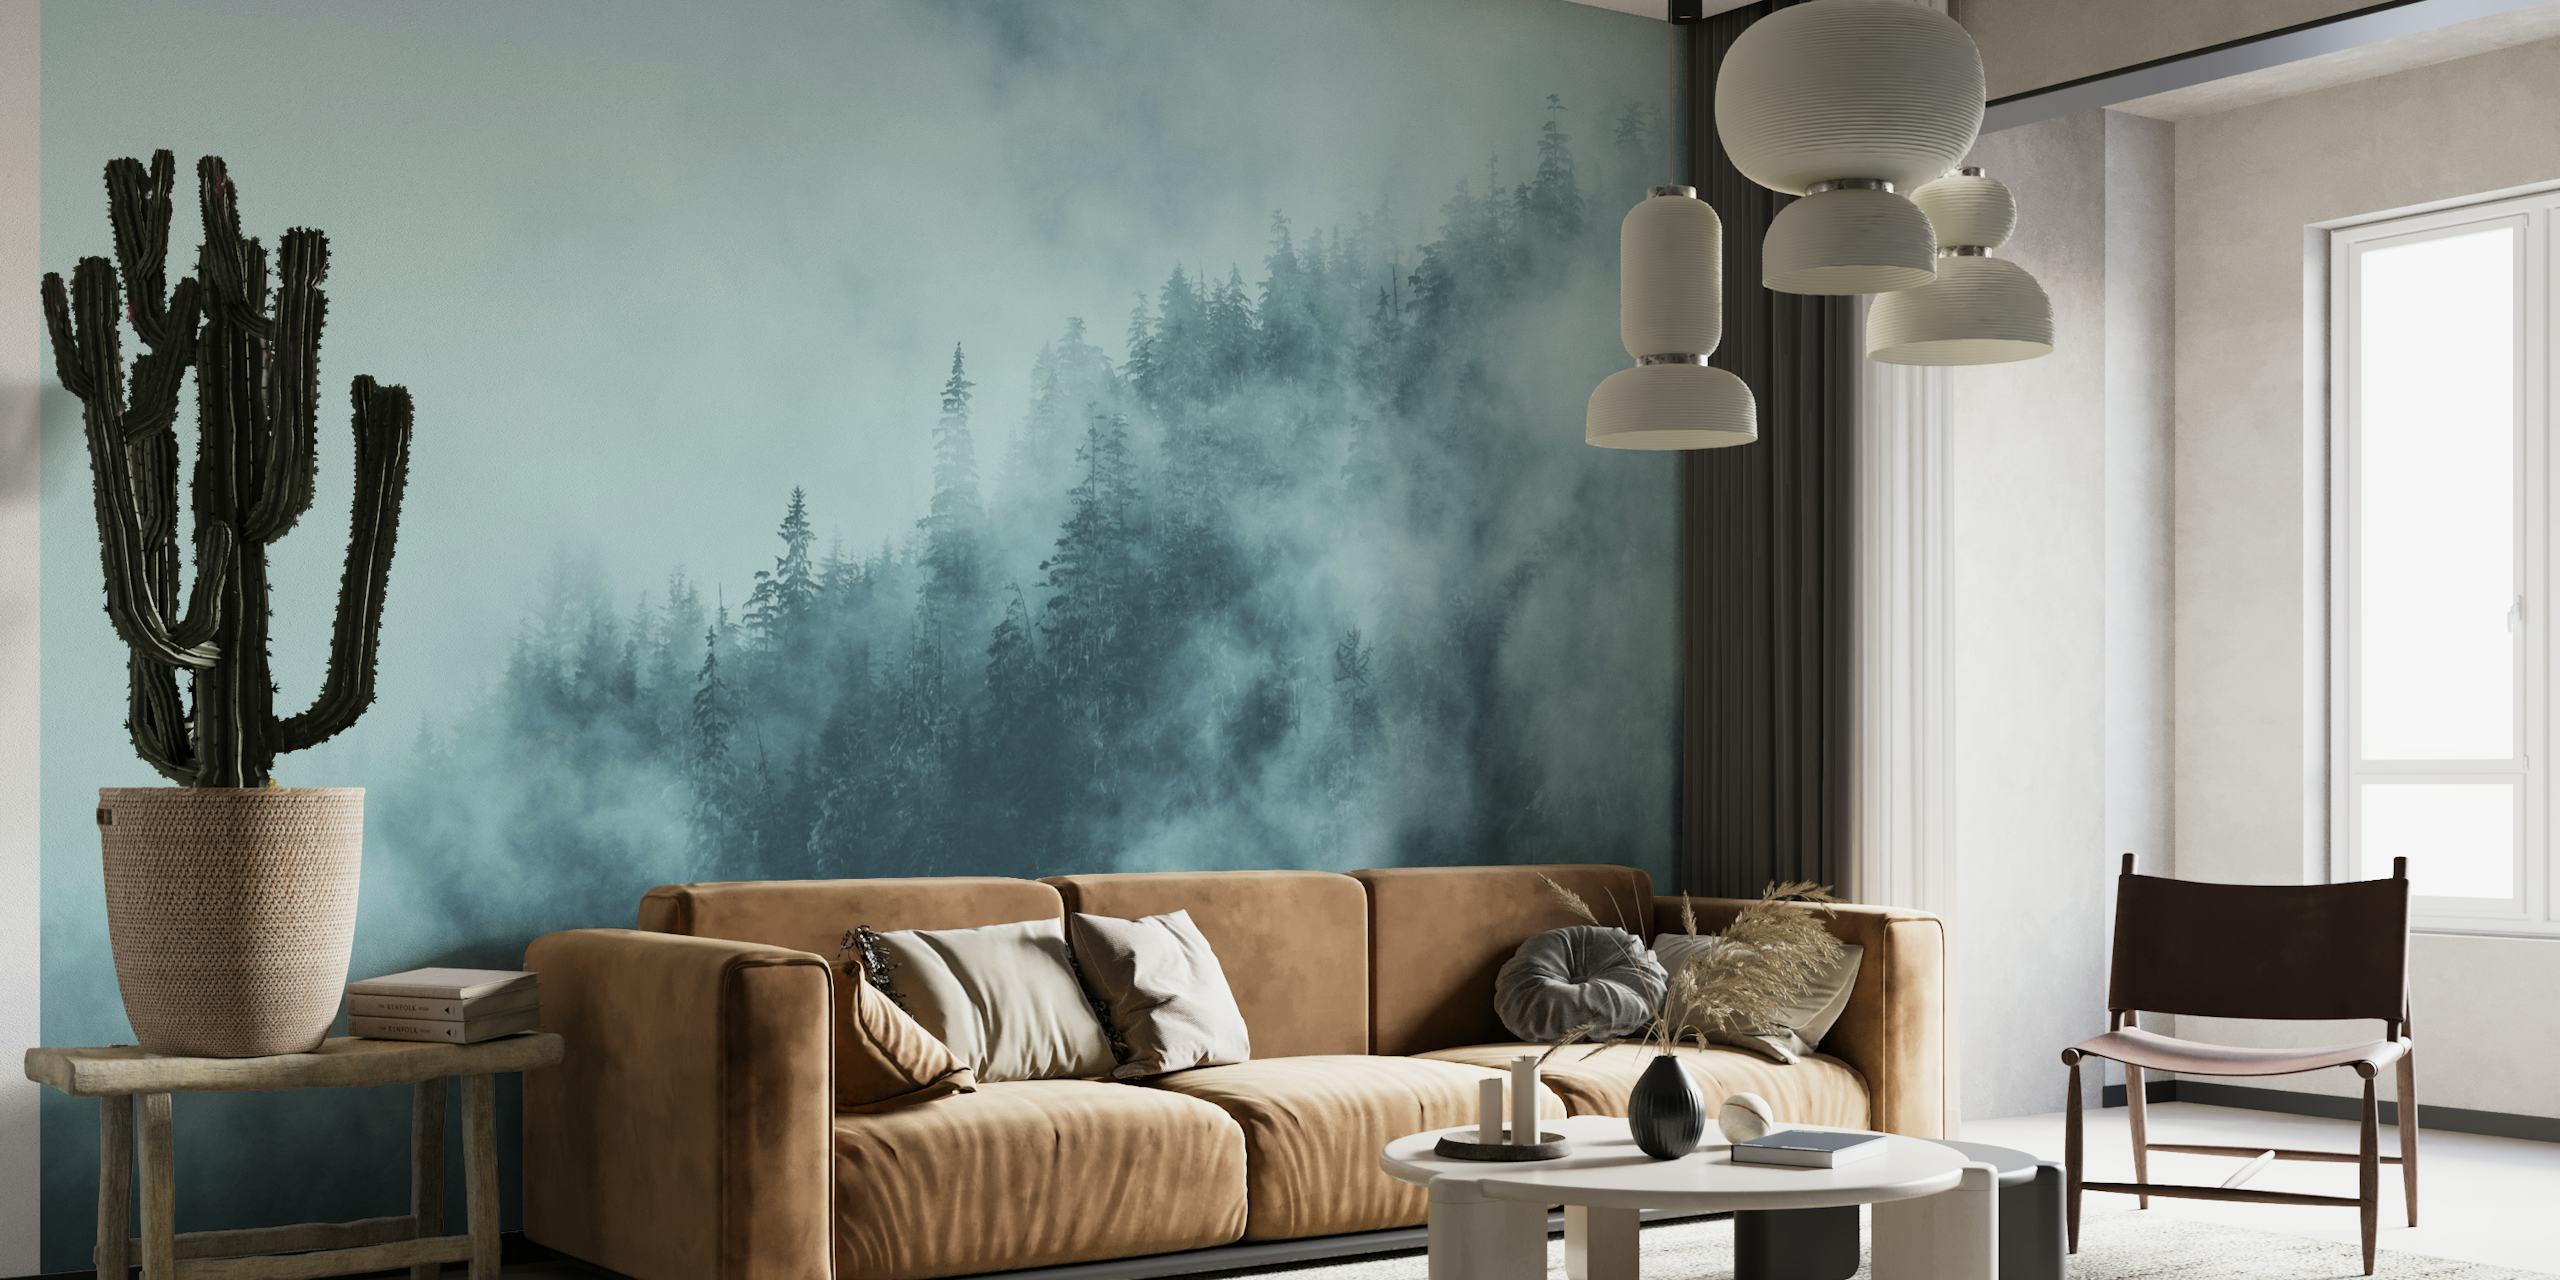 Foggy Forest Blue wall mural with silhouetted trees in mist